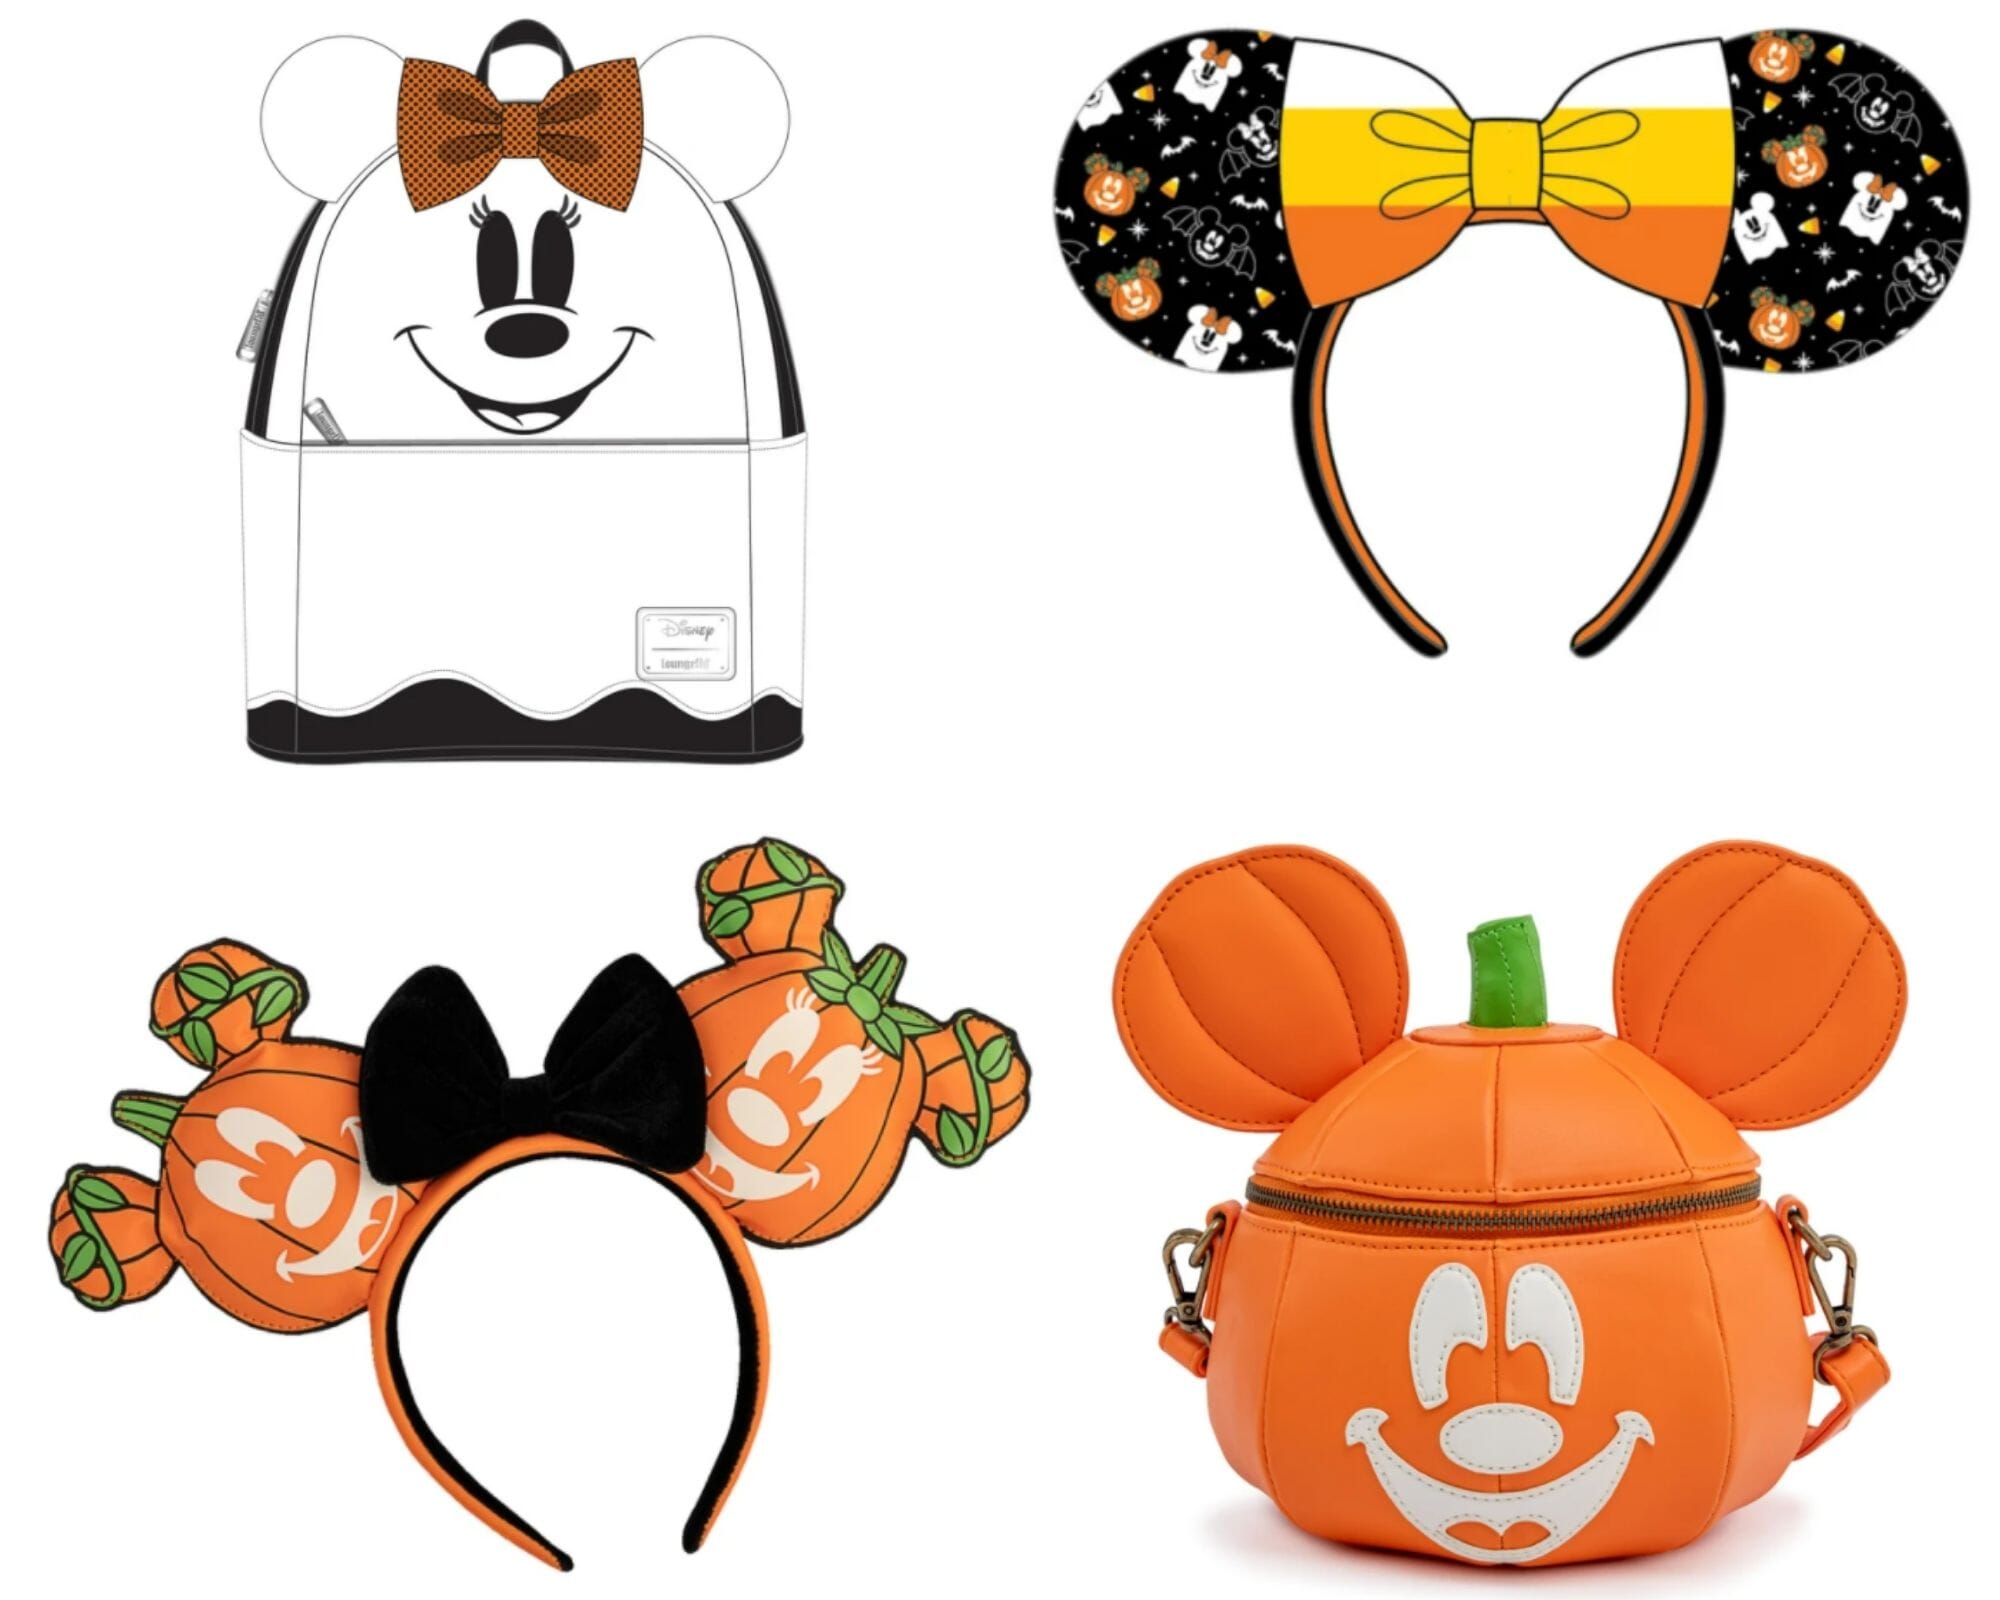 PHOTOS: NEW Disney Loungefly Mickey & Minnie Halloween Collection Coming Soon News Today